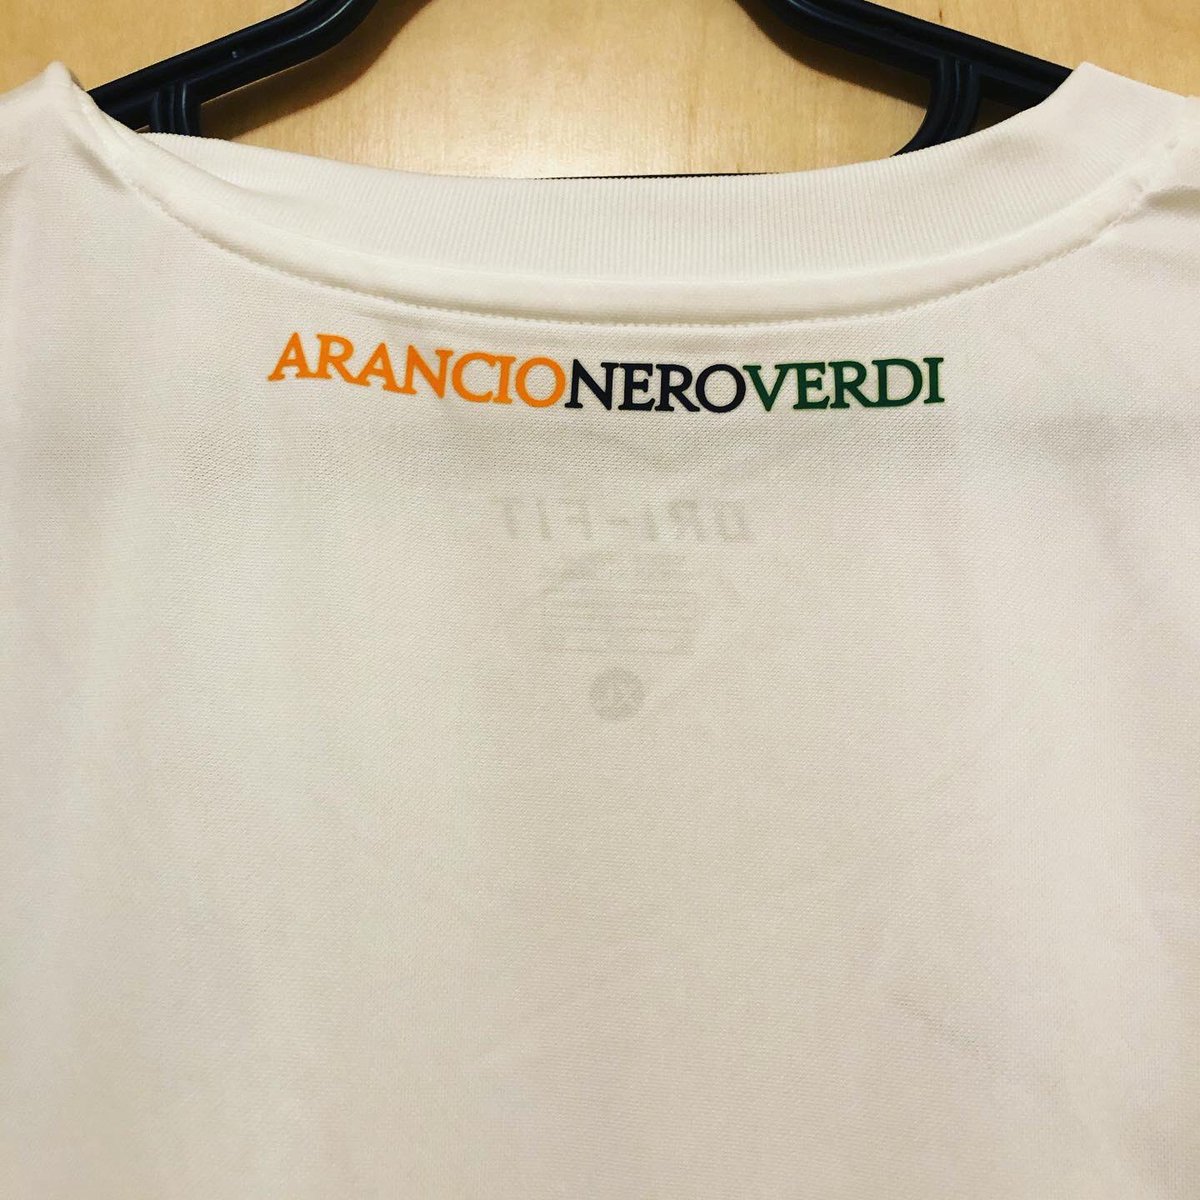 . @VeneziaFC_EN Away kit, 2016/17Back from a nasty injury, time to get back in shape and to start showing off my  #footballshirtcollection again! #VeneziaFC has a kit manufacturing deal with Nike, which is a bit unusual for lower-league teams in Italy #ClassicFootballShirts